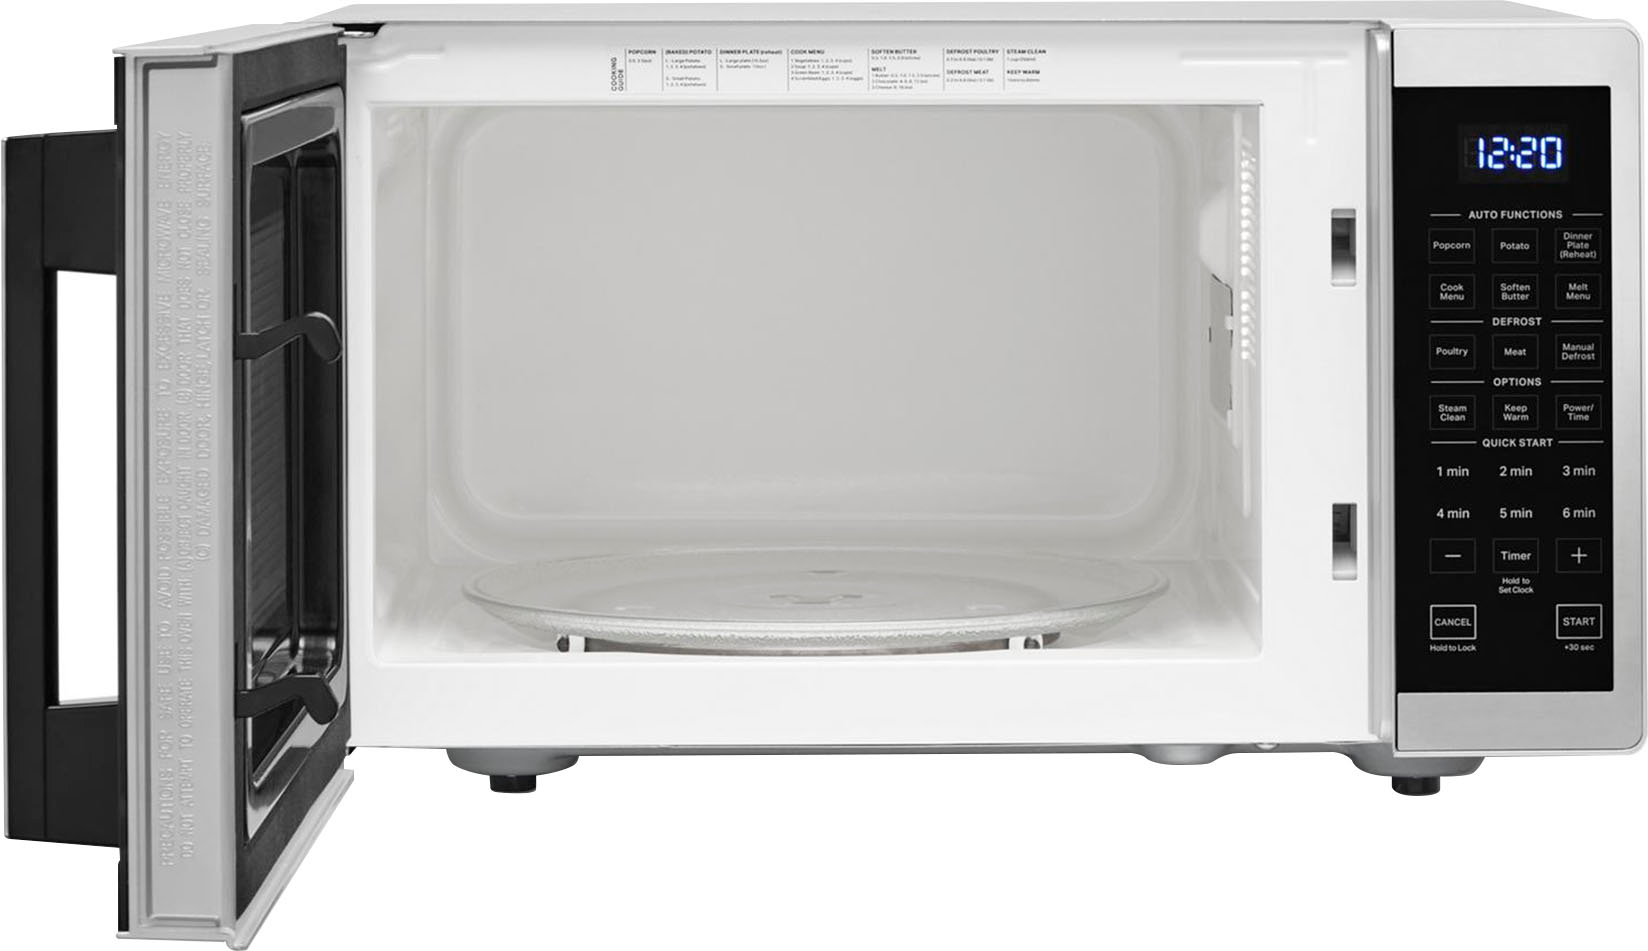 Angle View: Whirlpool - 0.9 Cu. Ft. Capacity Countertop Microwave with 900W Cooking Power - Silver